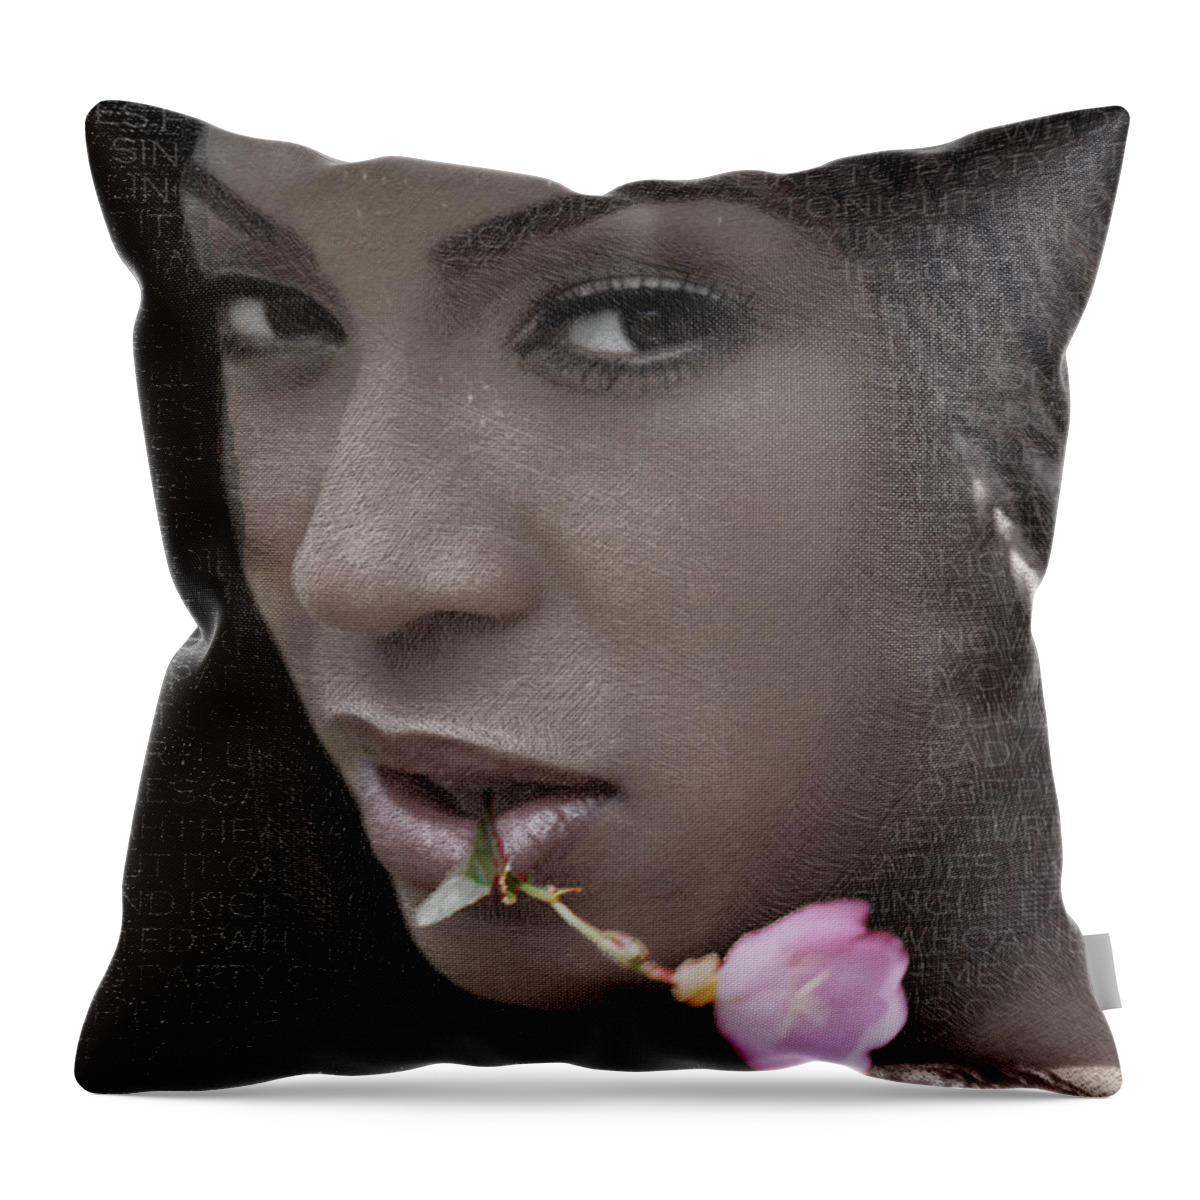 Luciano Pavarotti Throw Pillow featuring the painting Beyonce Knowles And Lyrics by Tony Rubino